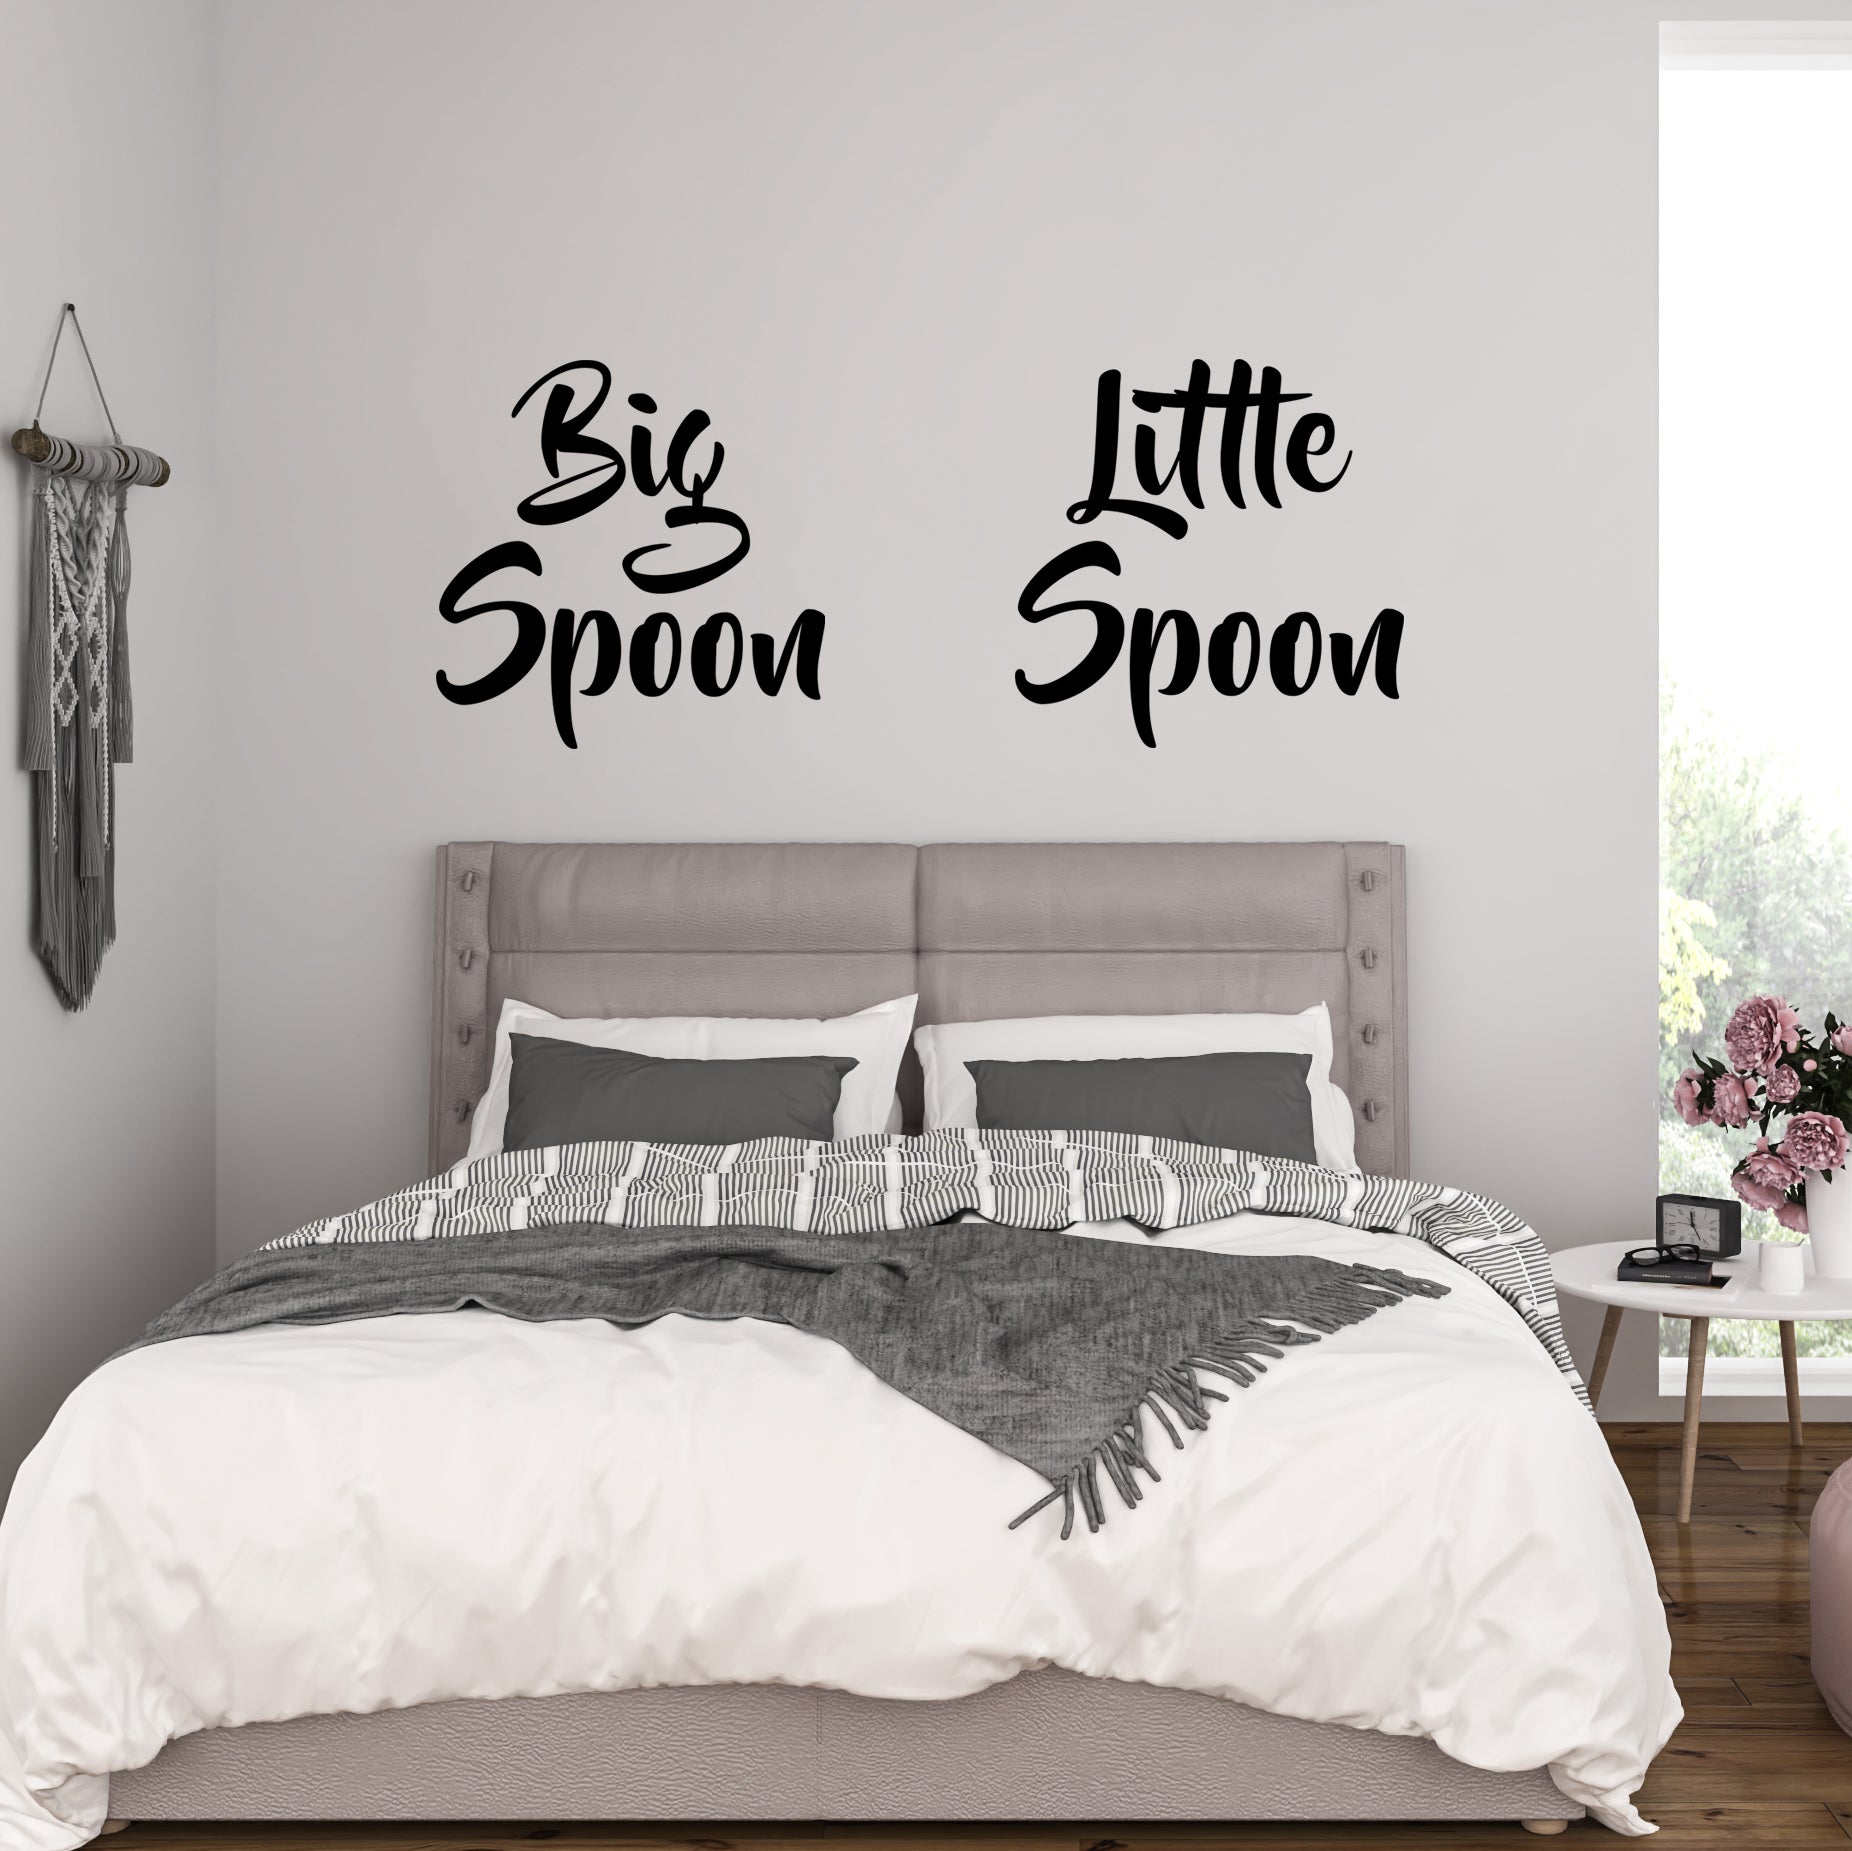 Big spoon, little spoon | Wall quote-Wall quote-Adnil Creations